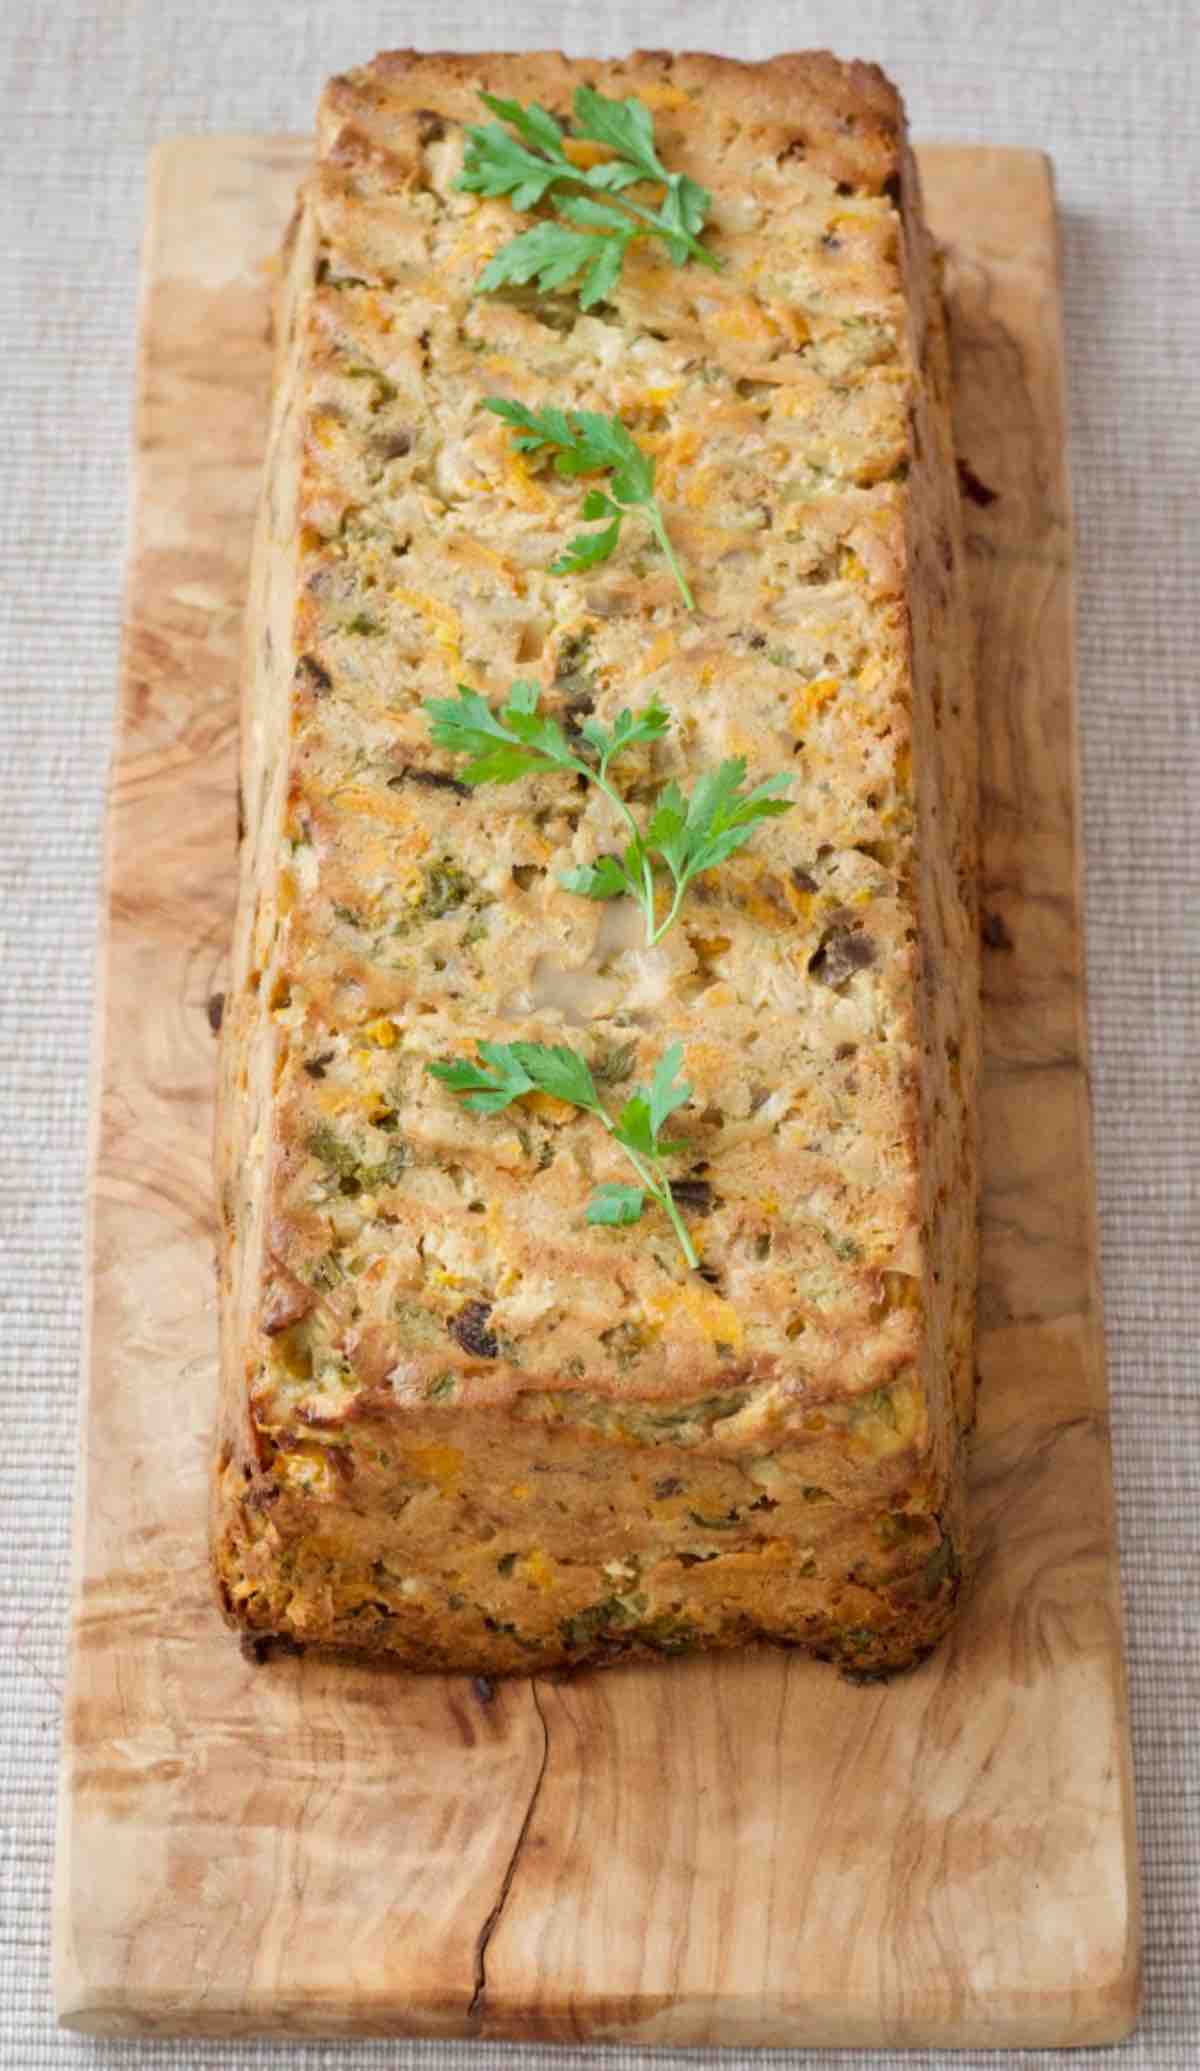 Celeriac veggie loaf presented simply on a board garnished with parsley.